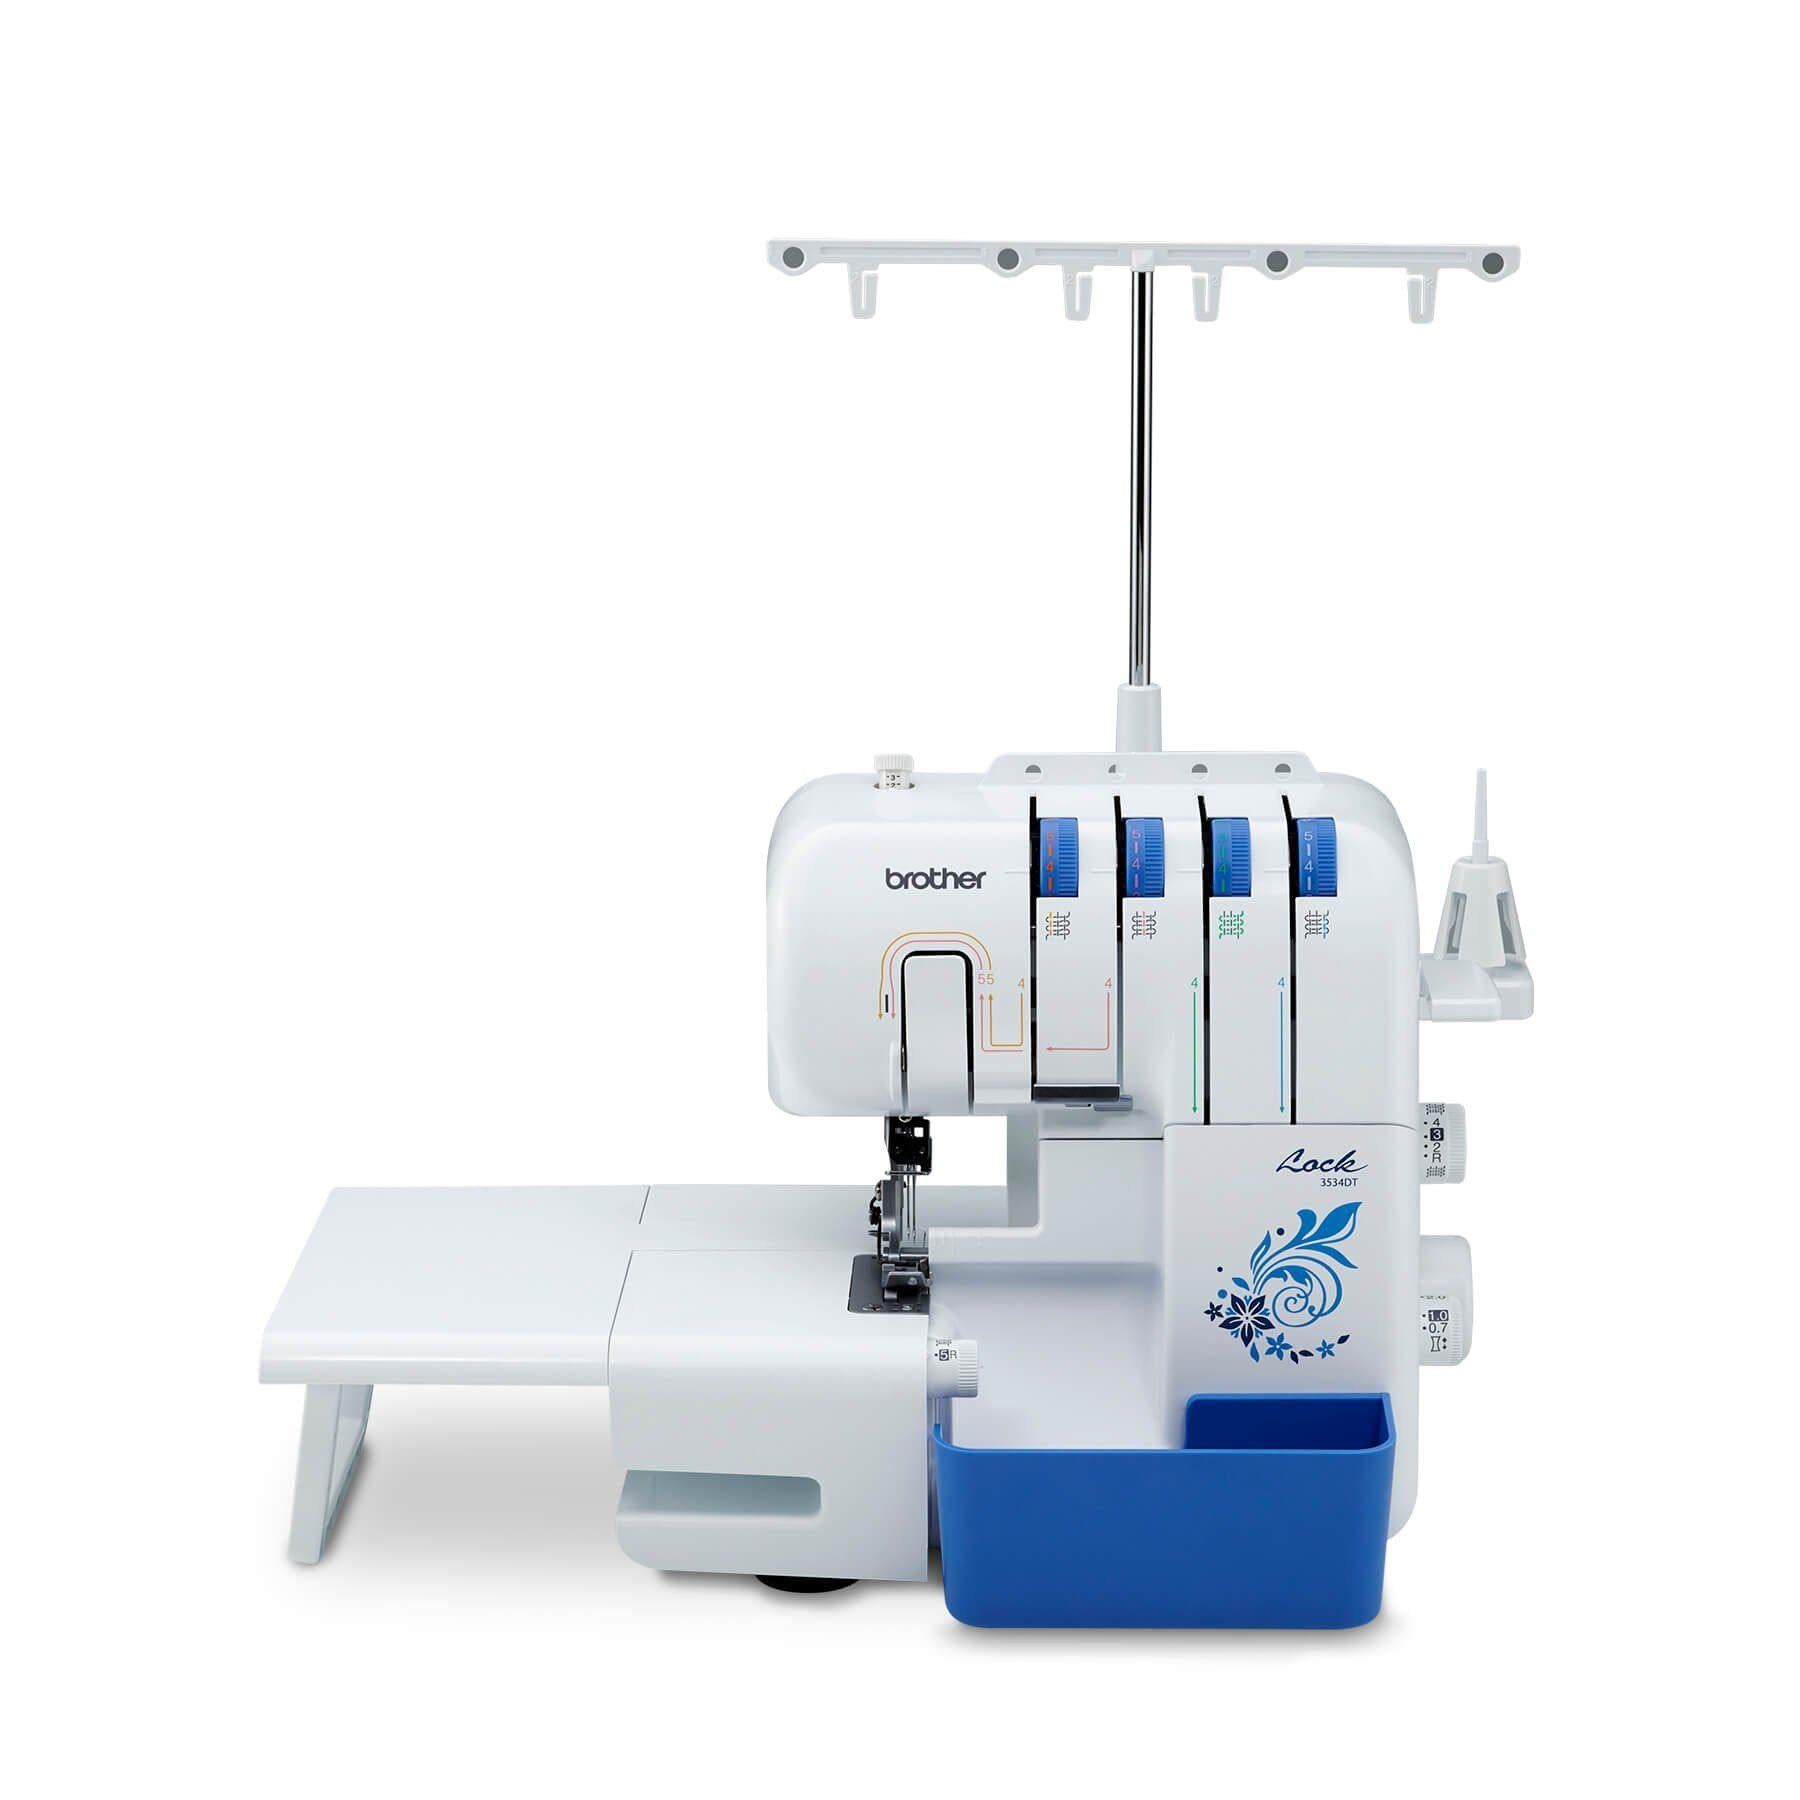 Brother 3534DT Serger - Kawartha Quilting and Sewing LTD.